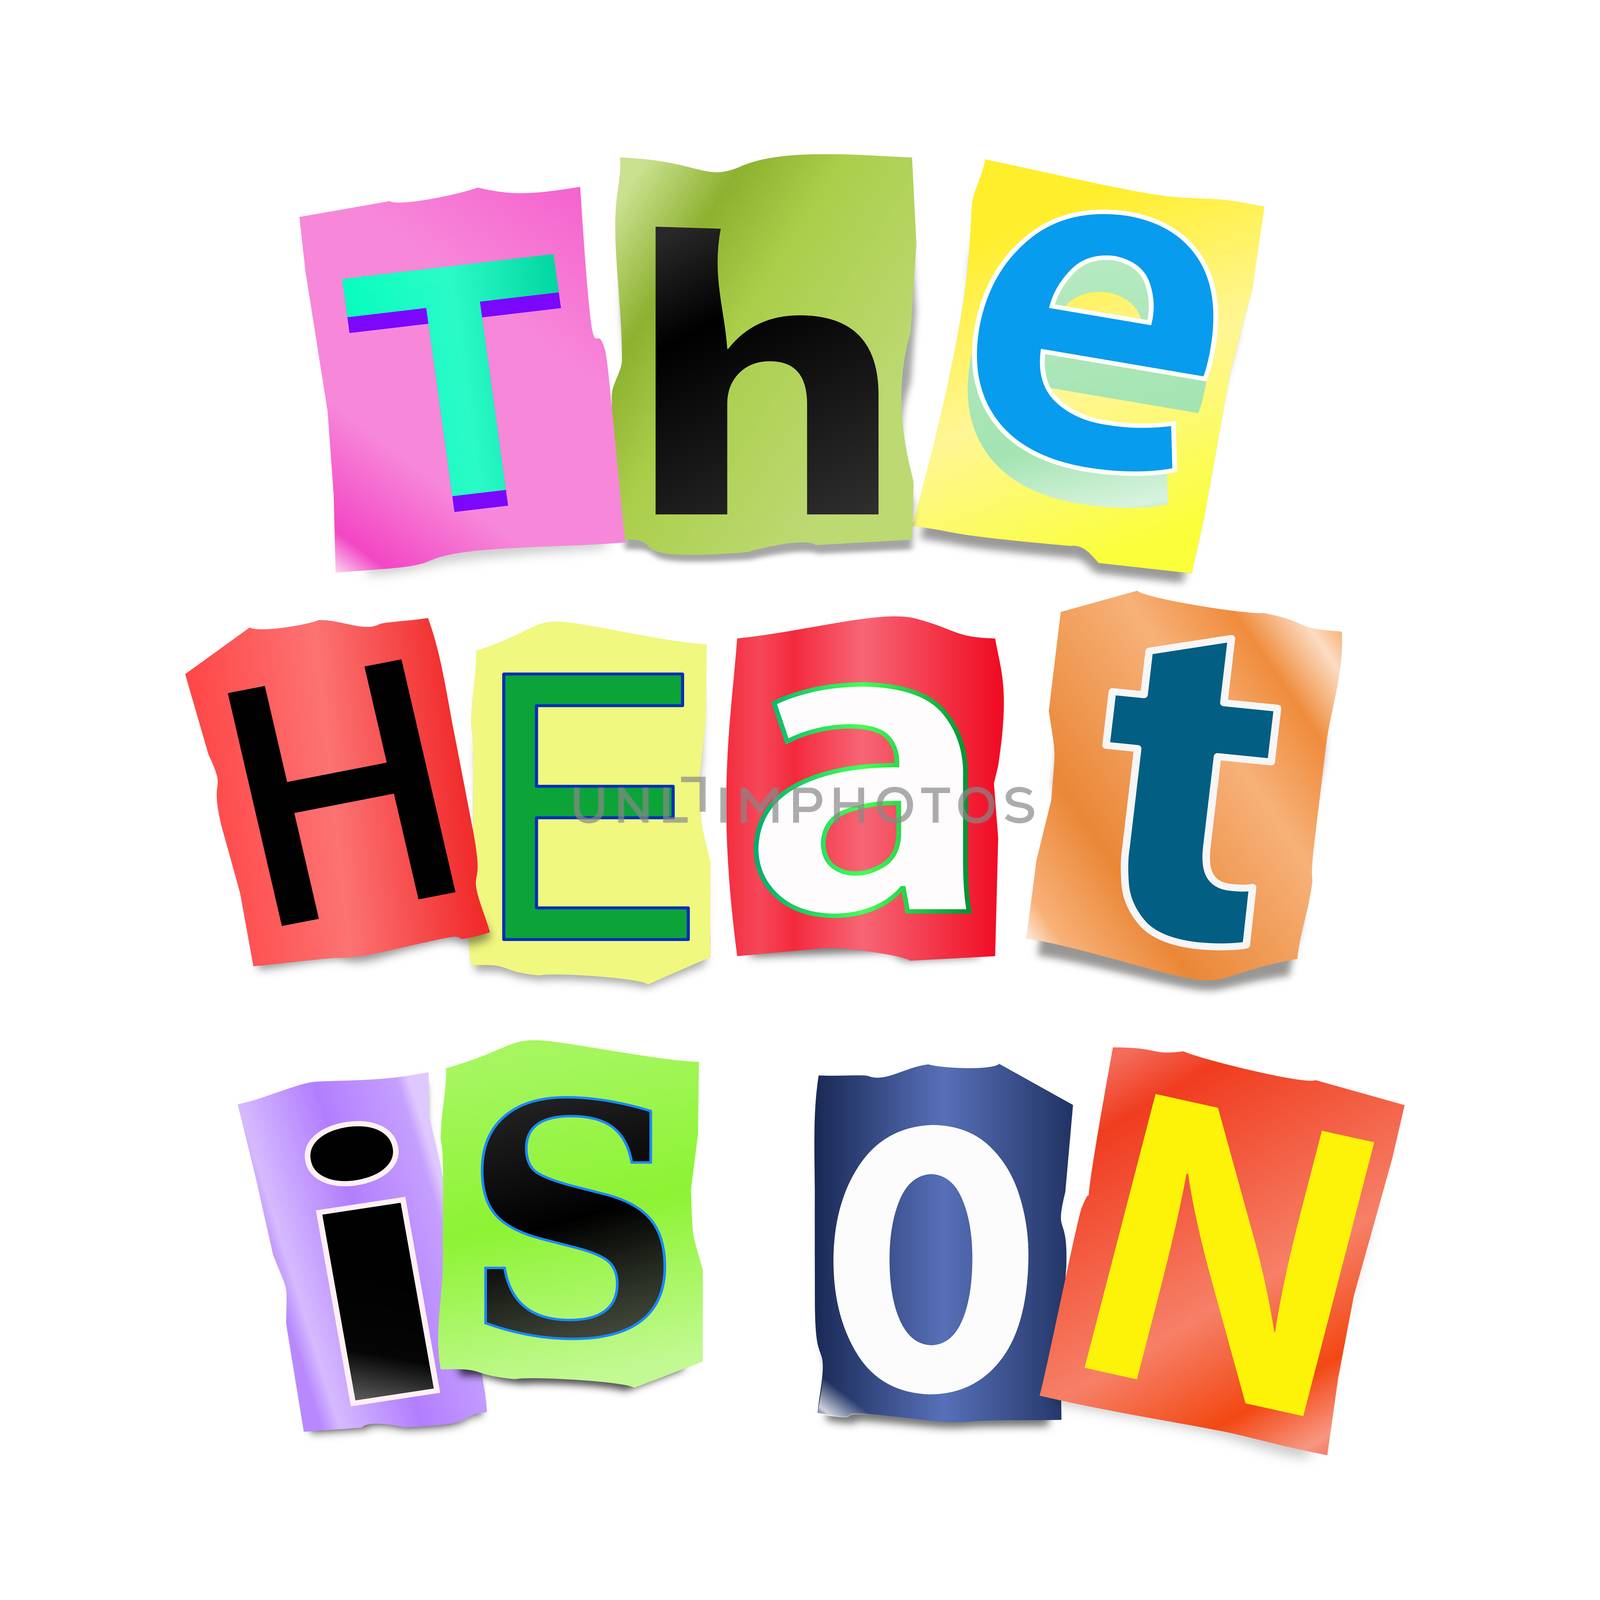 Illustration depicting a set of cut out printed letters arranged to form the words the heat is on.